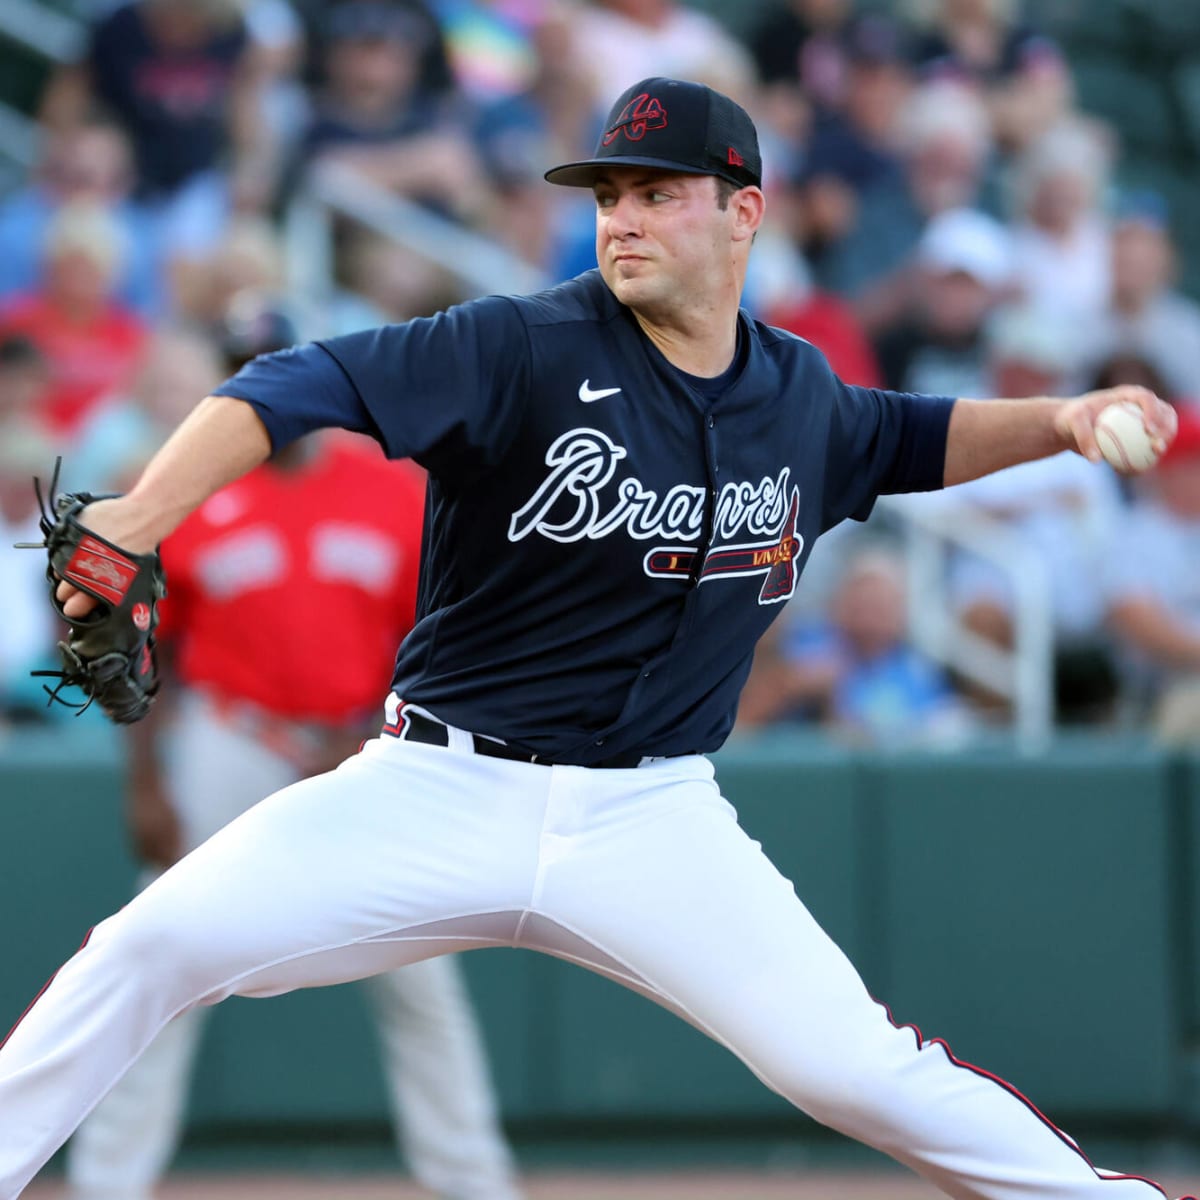 Atlanta Braves Opening Day Roster Prediction -- Pitchers